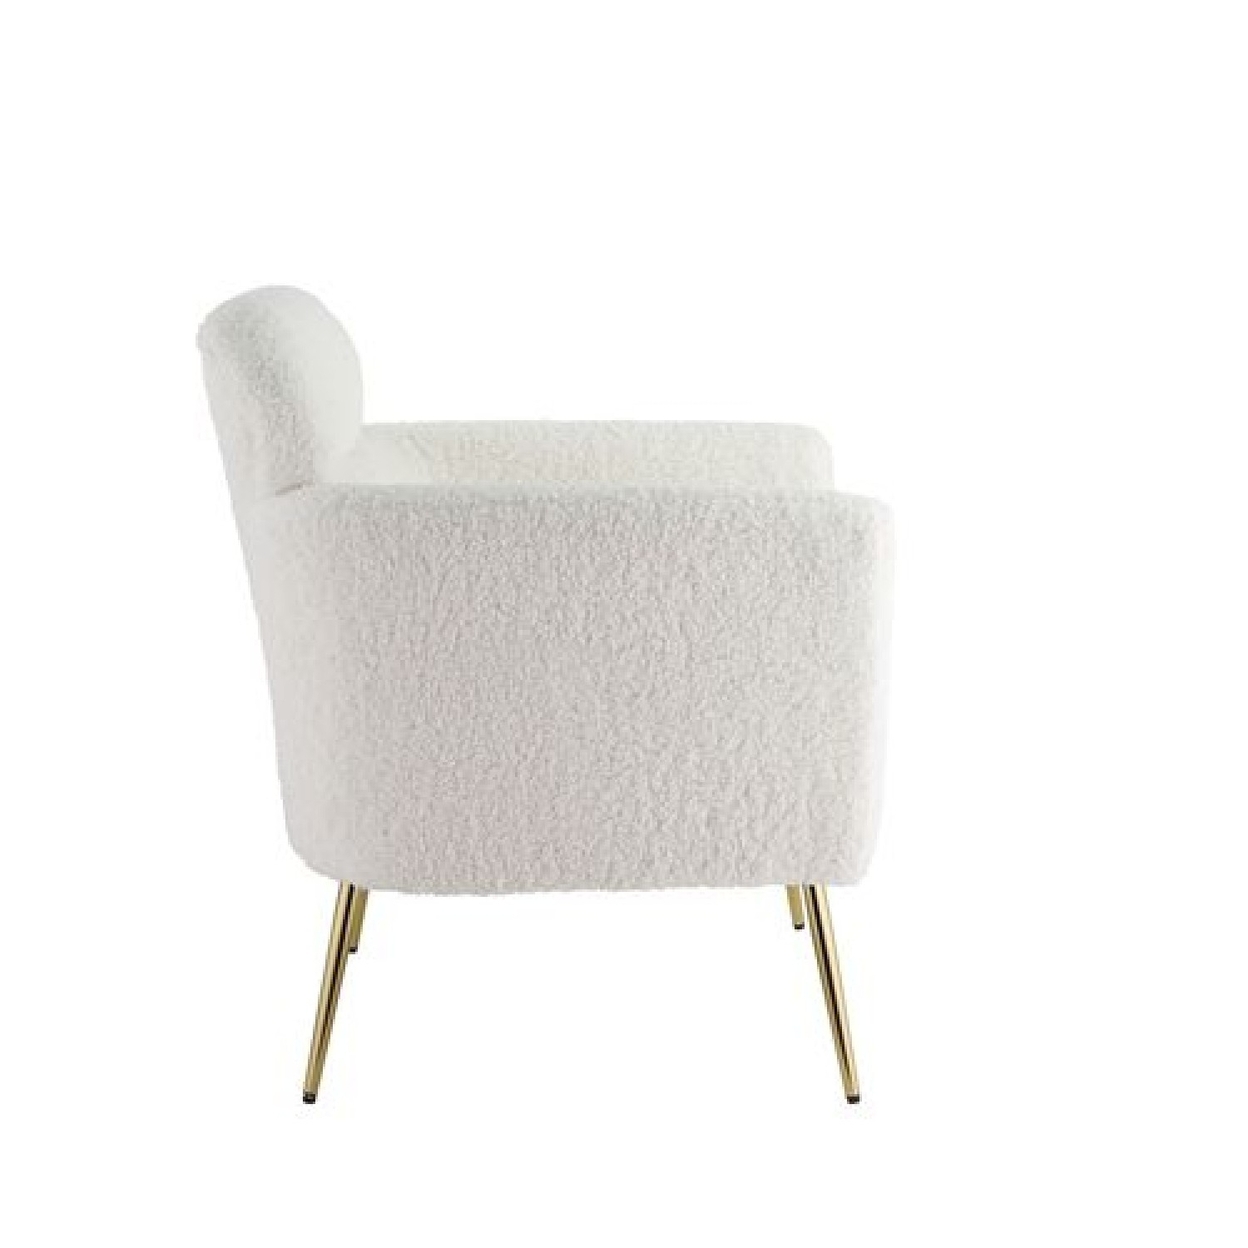 Accent Chair With Textured Fabric And Sleek Metal Legs, White And Gold- Saltoro Sherpi